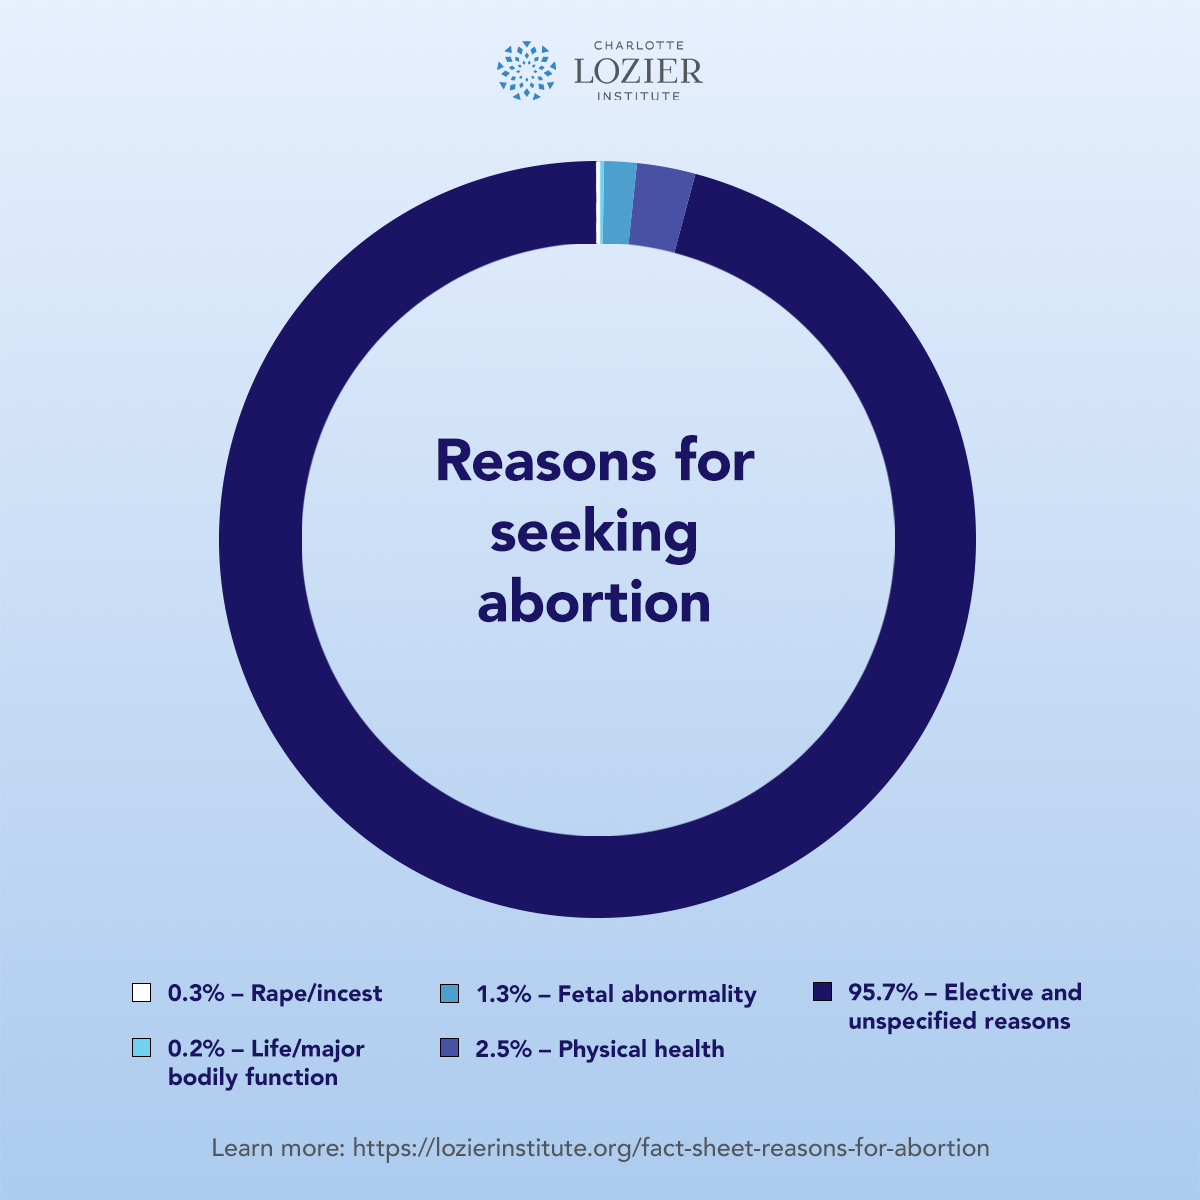 Image: Abortion Reasons chart shows abortion exceptions a small percentage (Charlotte Lozier Institute 2022)